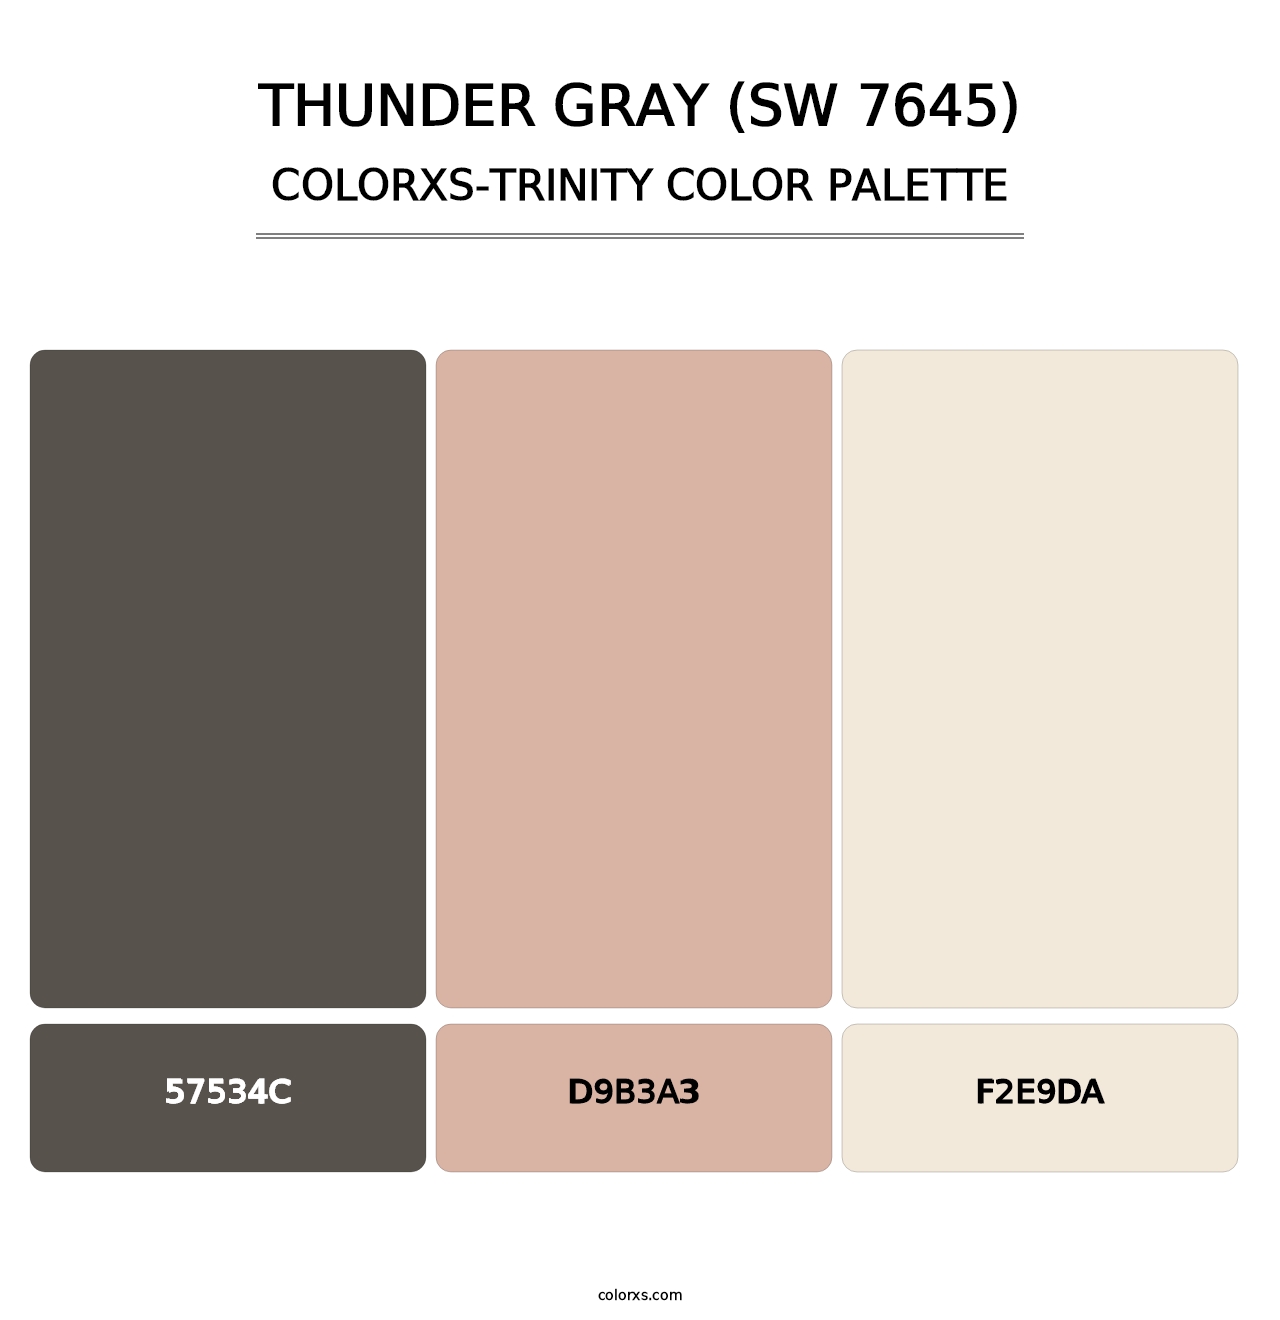 Thunder Gray (SW 7645) - Colorxs Trinity Palette